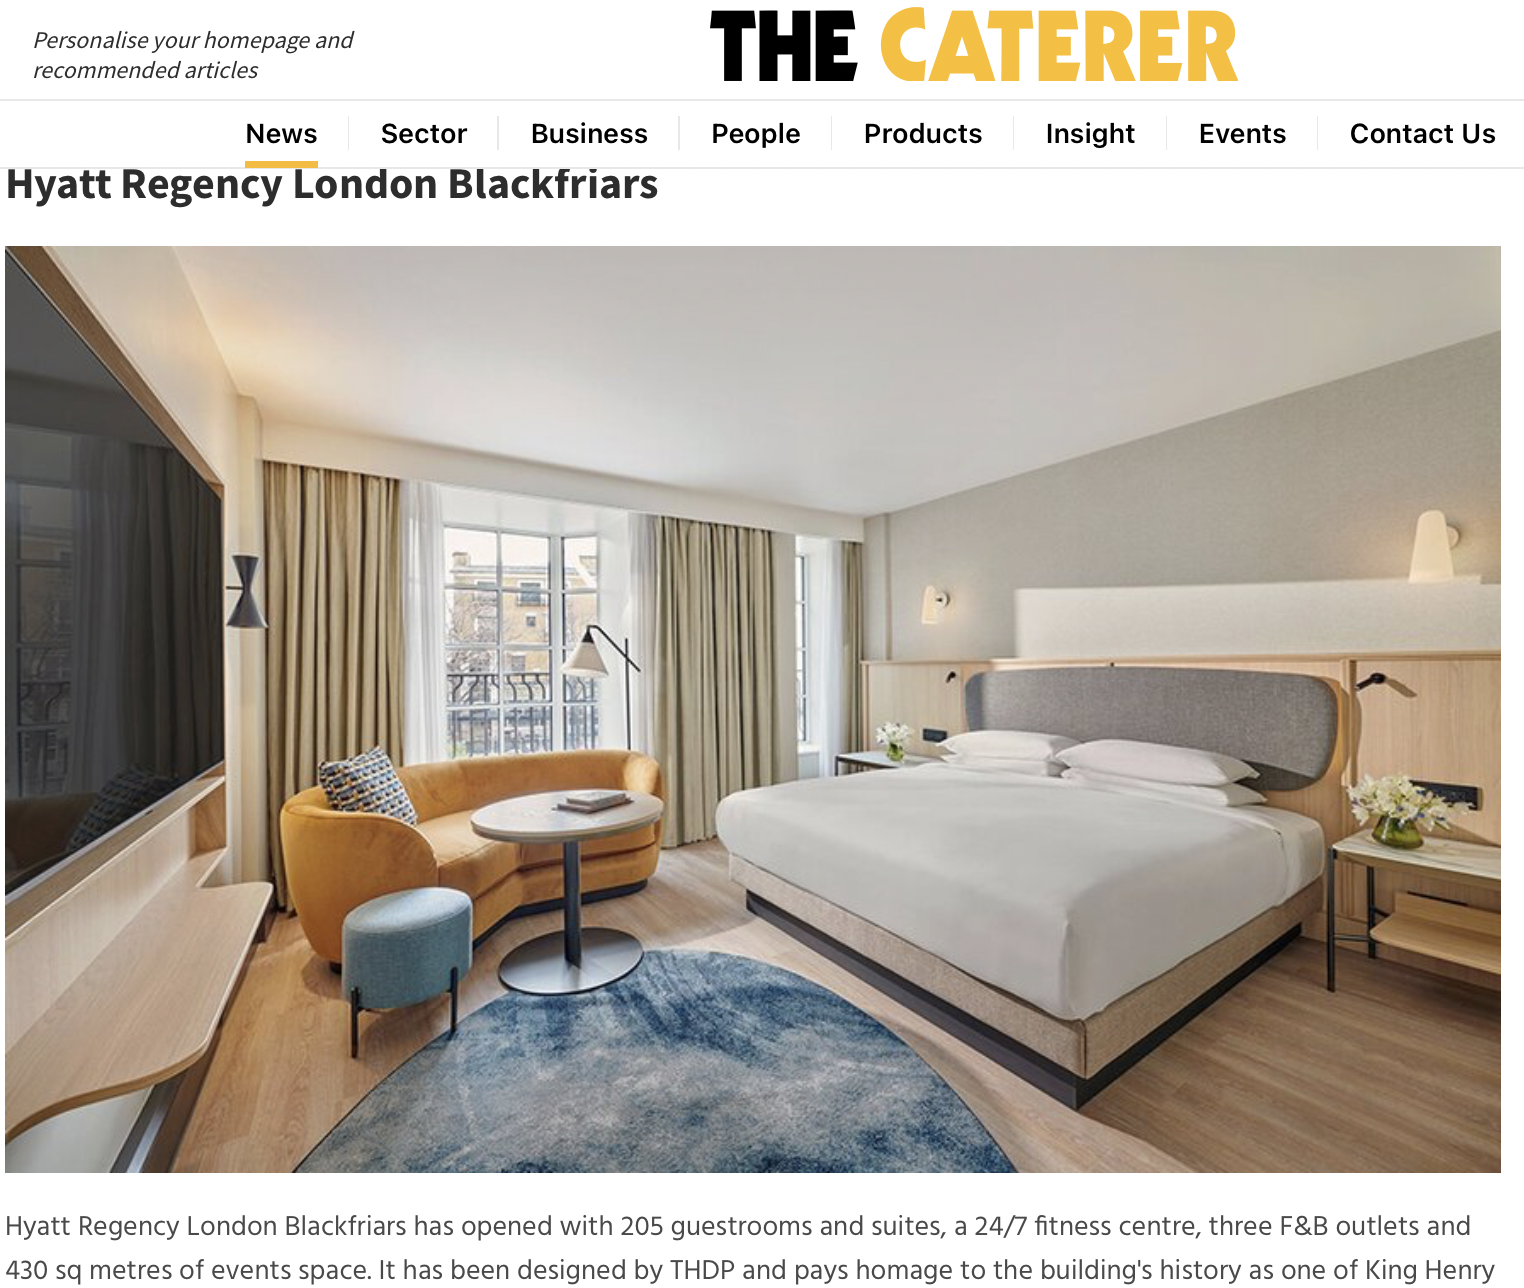 THE CATERER